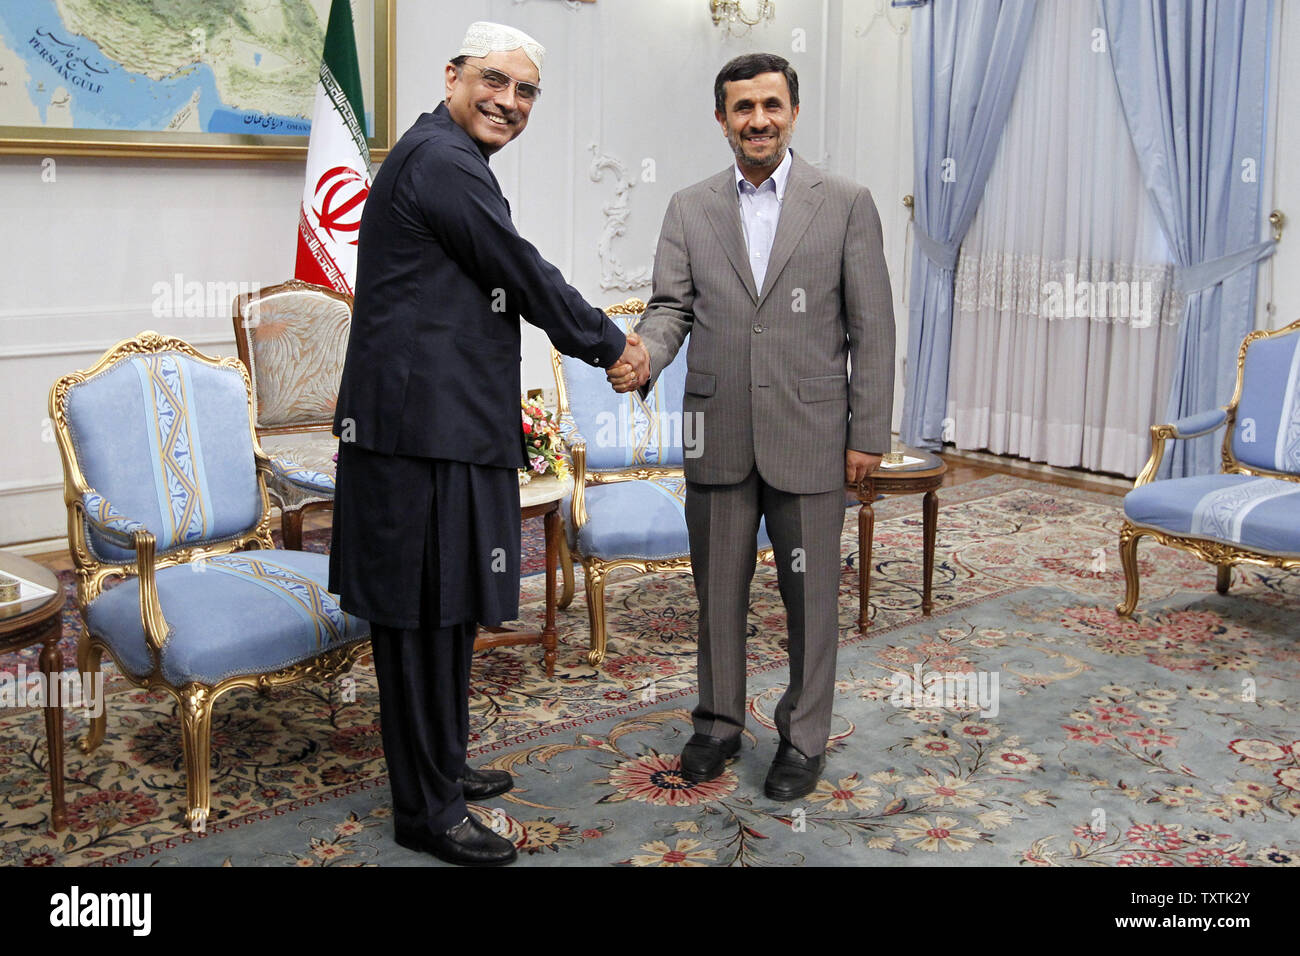 Iranian President Mahmoud Ahmadinejad (R) shakes hands with his Pakistani counterpart Asif Ali Zardari in the presidential palace on June 24, 2011 in Tehran. Zardari  scheduled to participate in the Global Fight against Terrorism International Summit which will be held on June 25 and 26 in Tehran.     UPI/Maryam Rahmanian Stock Photo